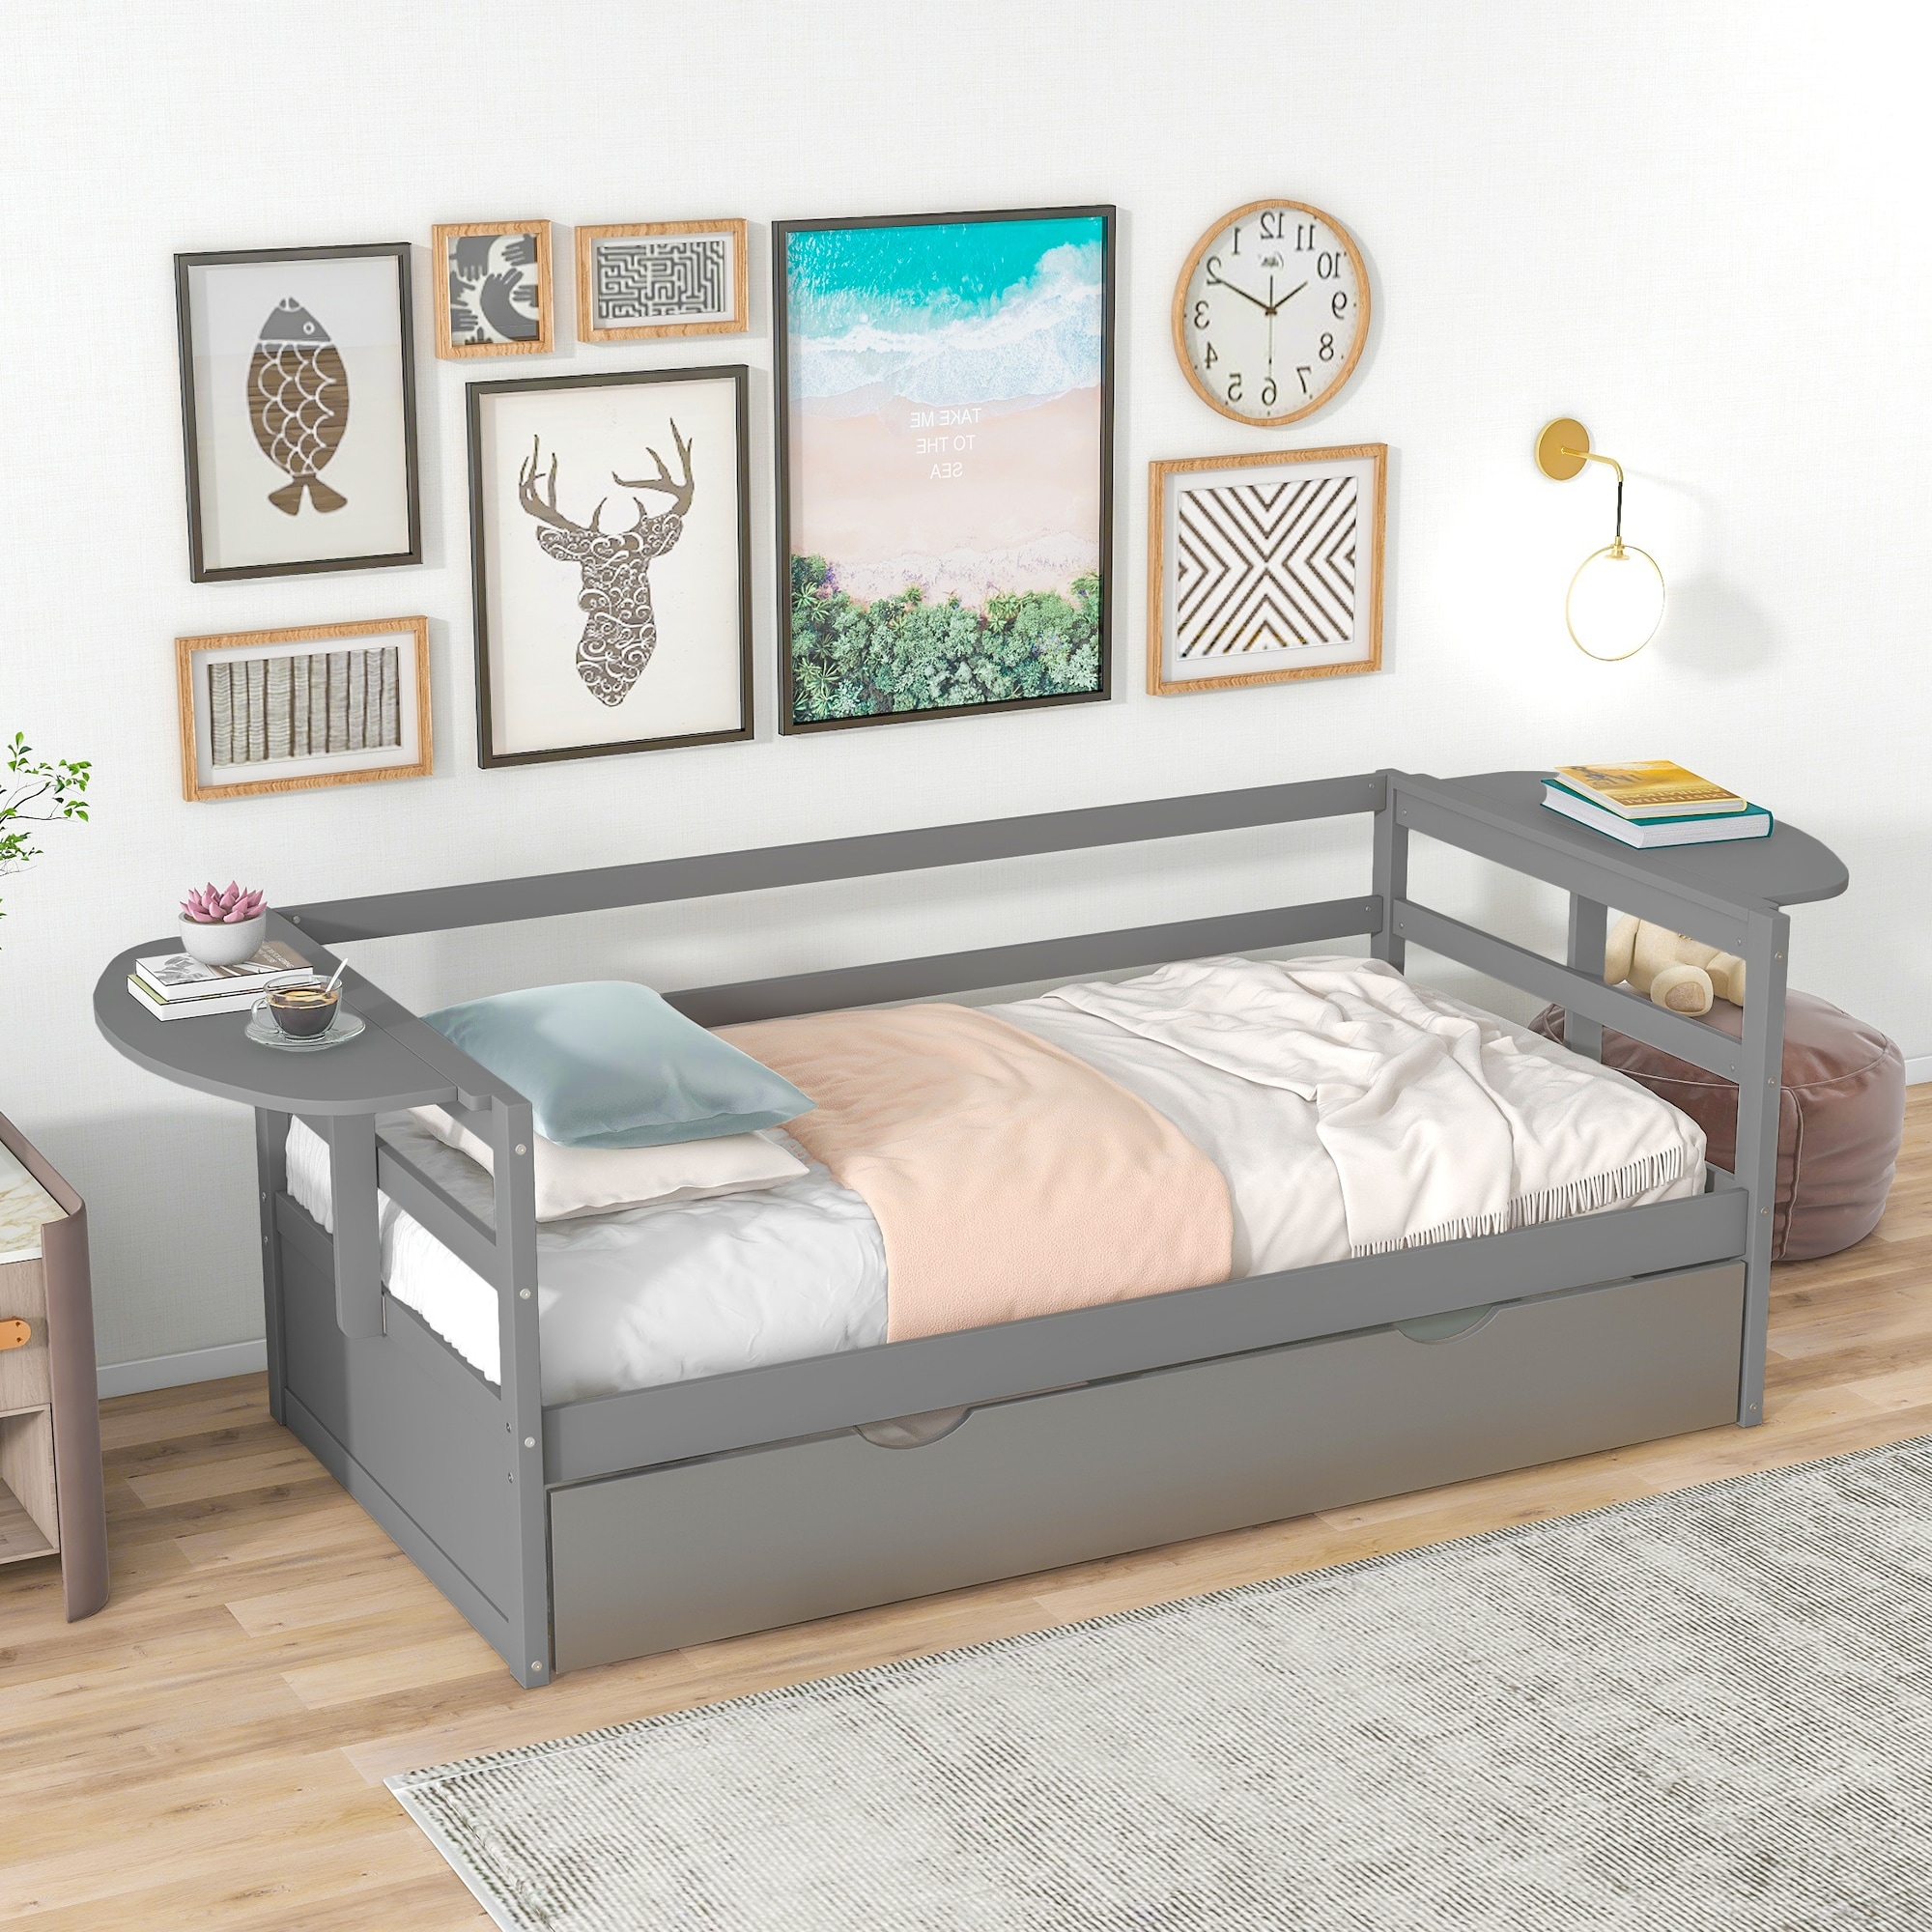 Twin Size Daybed With Trundle And Foldable Shelves On Both Sides  White